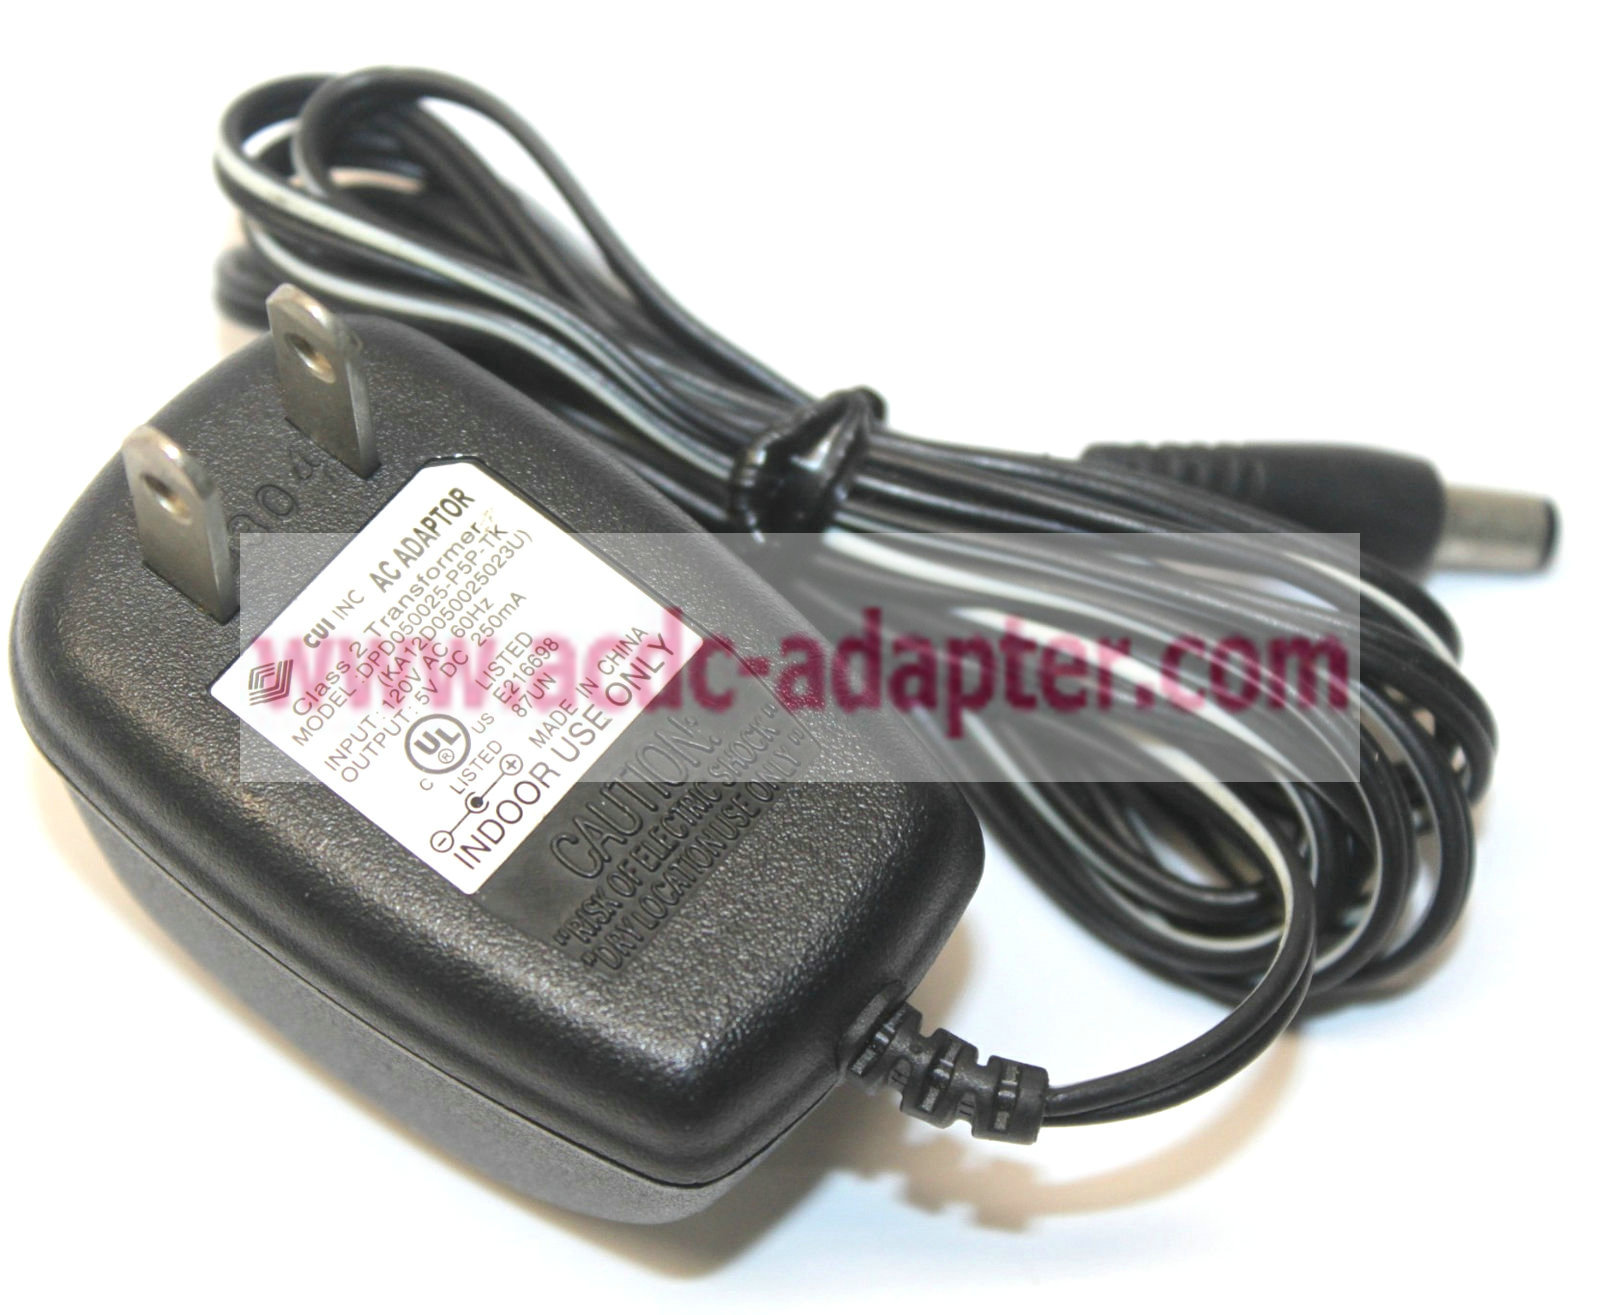 New CUI DPD050025-P5P-TK(KA12D050025023U) 5V 250mA AC Adapter Plug-In Charger Powe - Click Image to Close